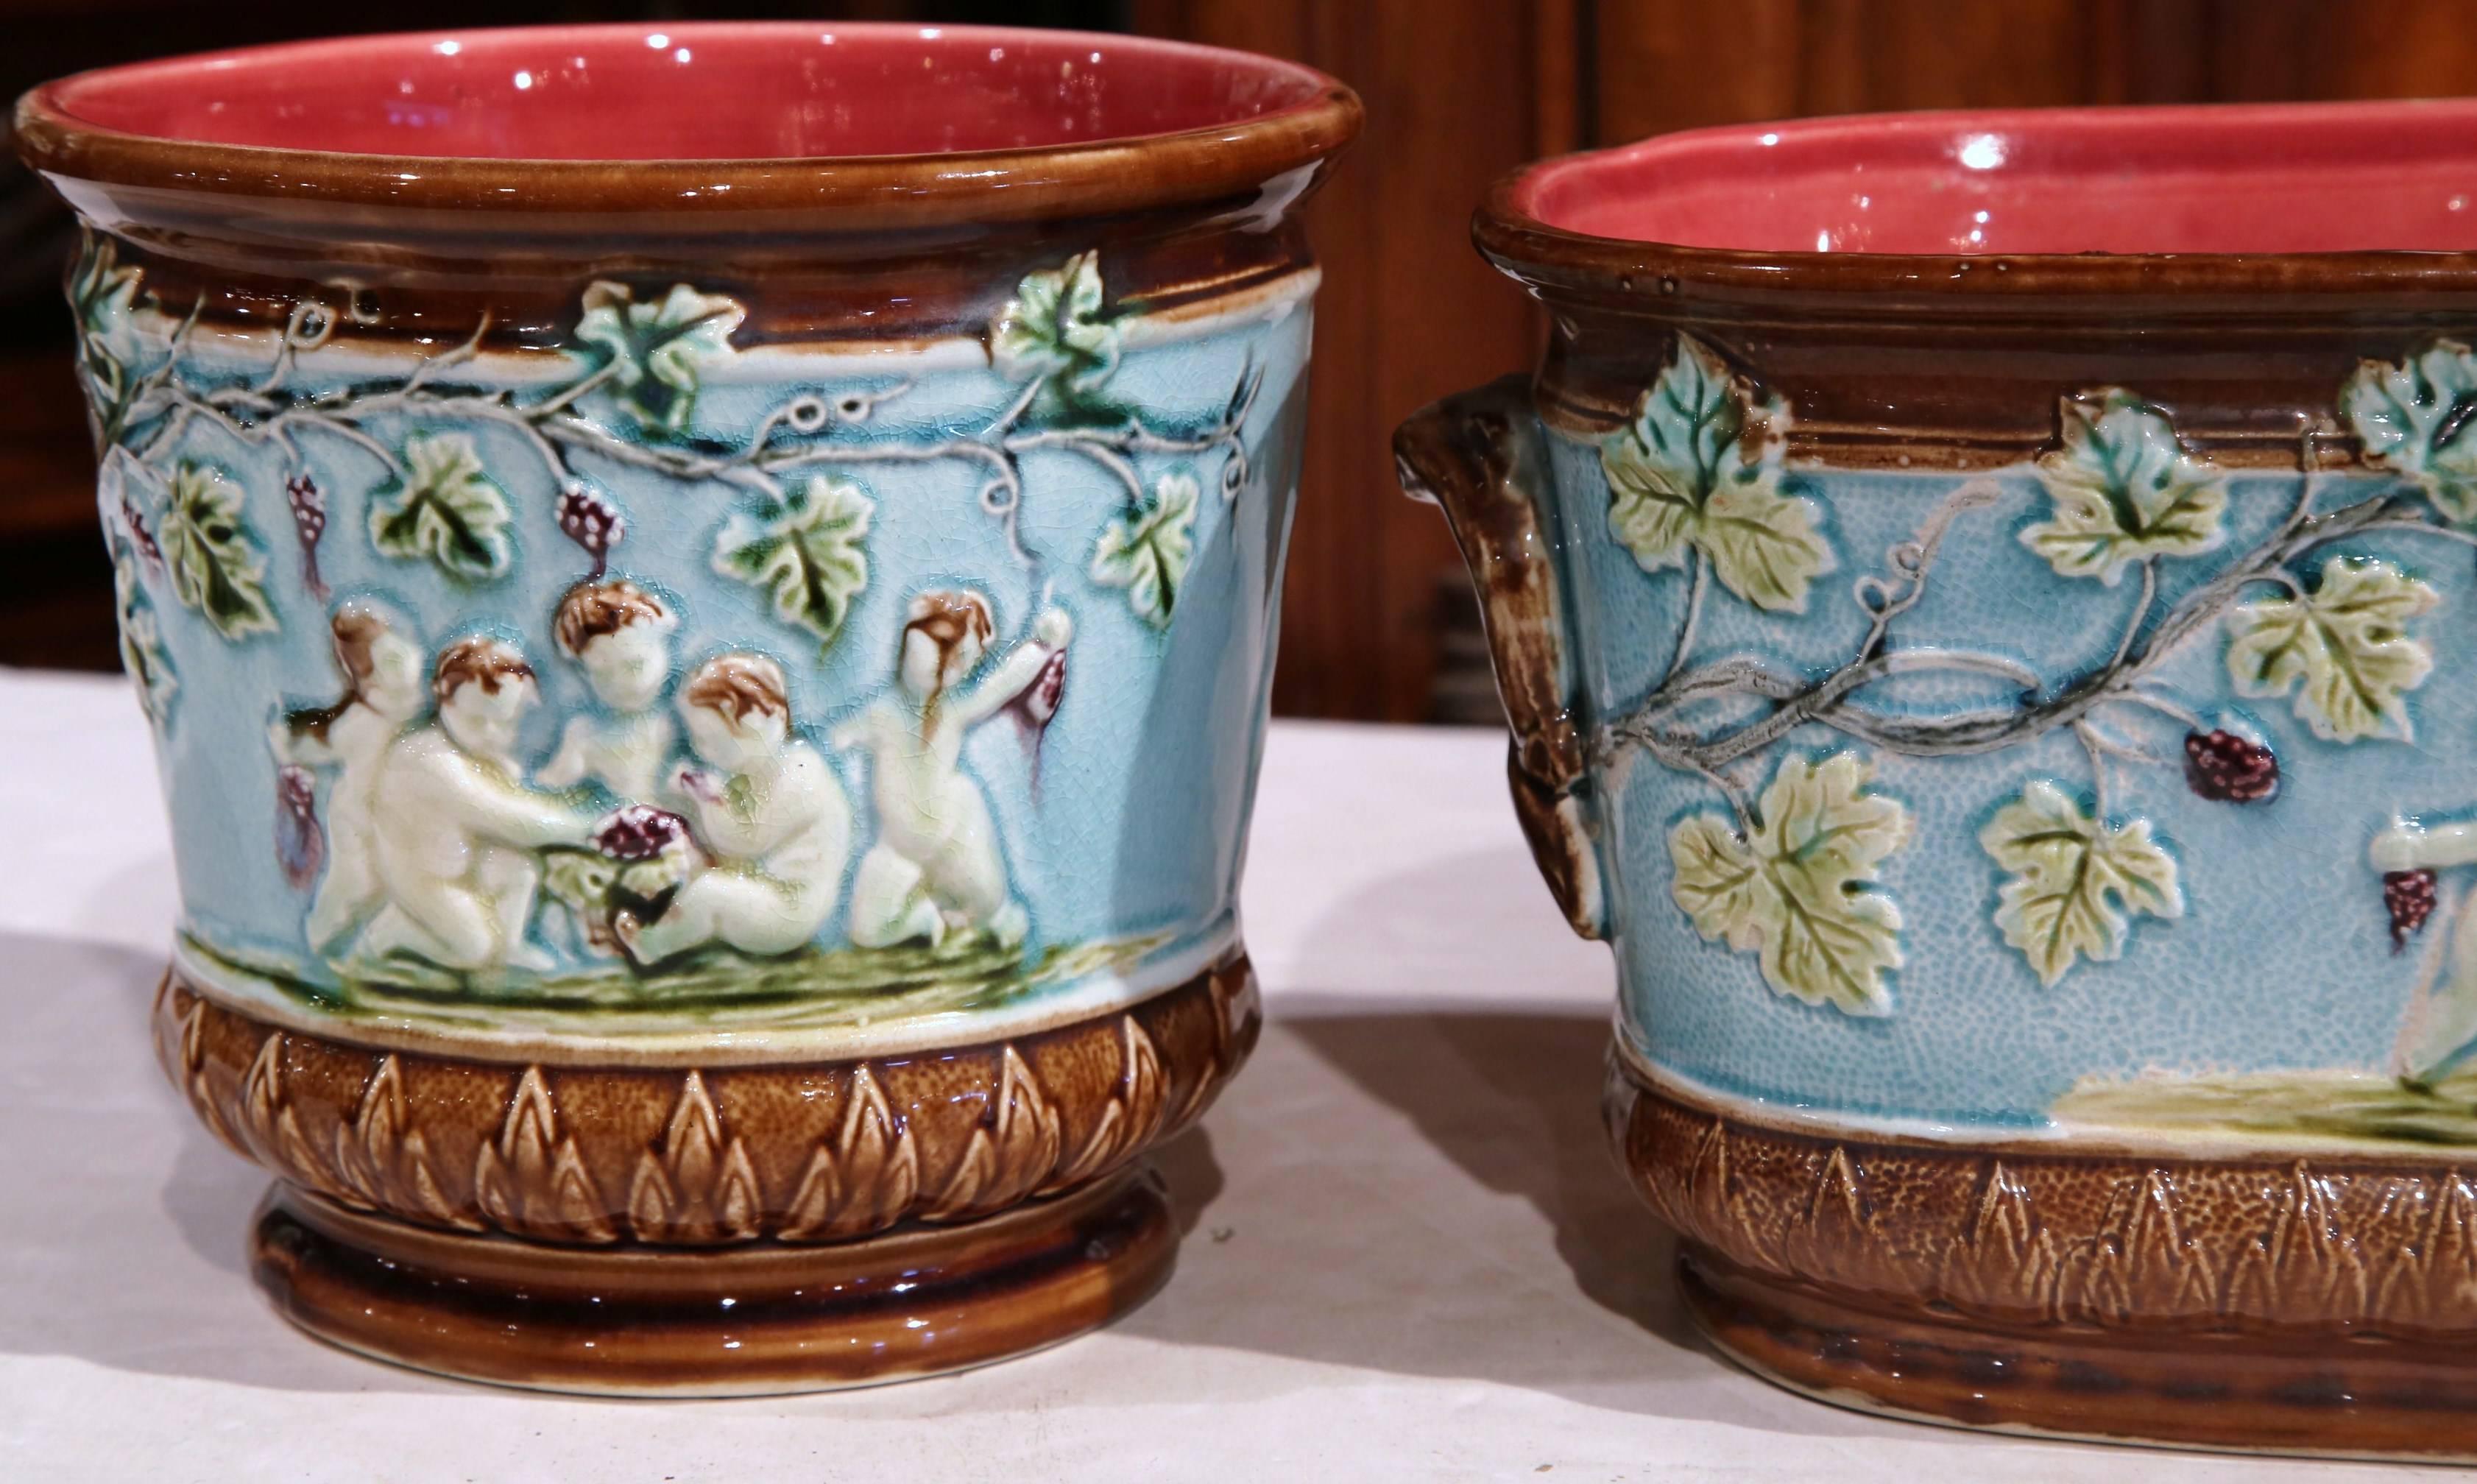 This fine antique set of majolica planters was crafted in France, circa 1880. Each ceramic cache pot depicts the reign of Bacchus thru scenes of young cherubs with vines and grapes. These colorful planters are in excellent condition with rich hand